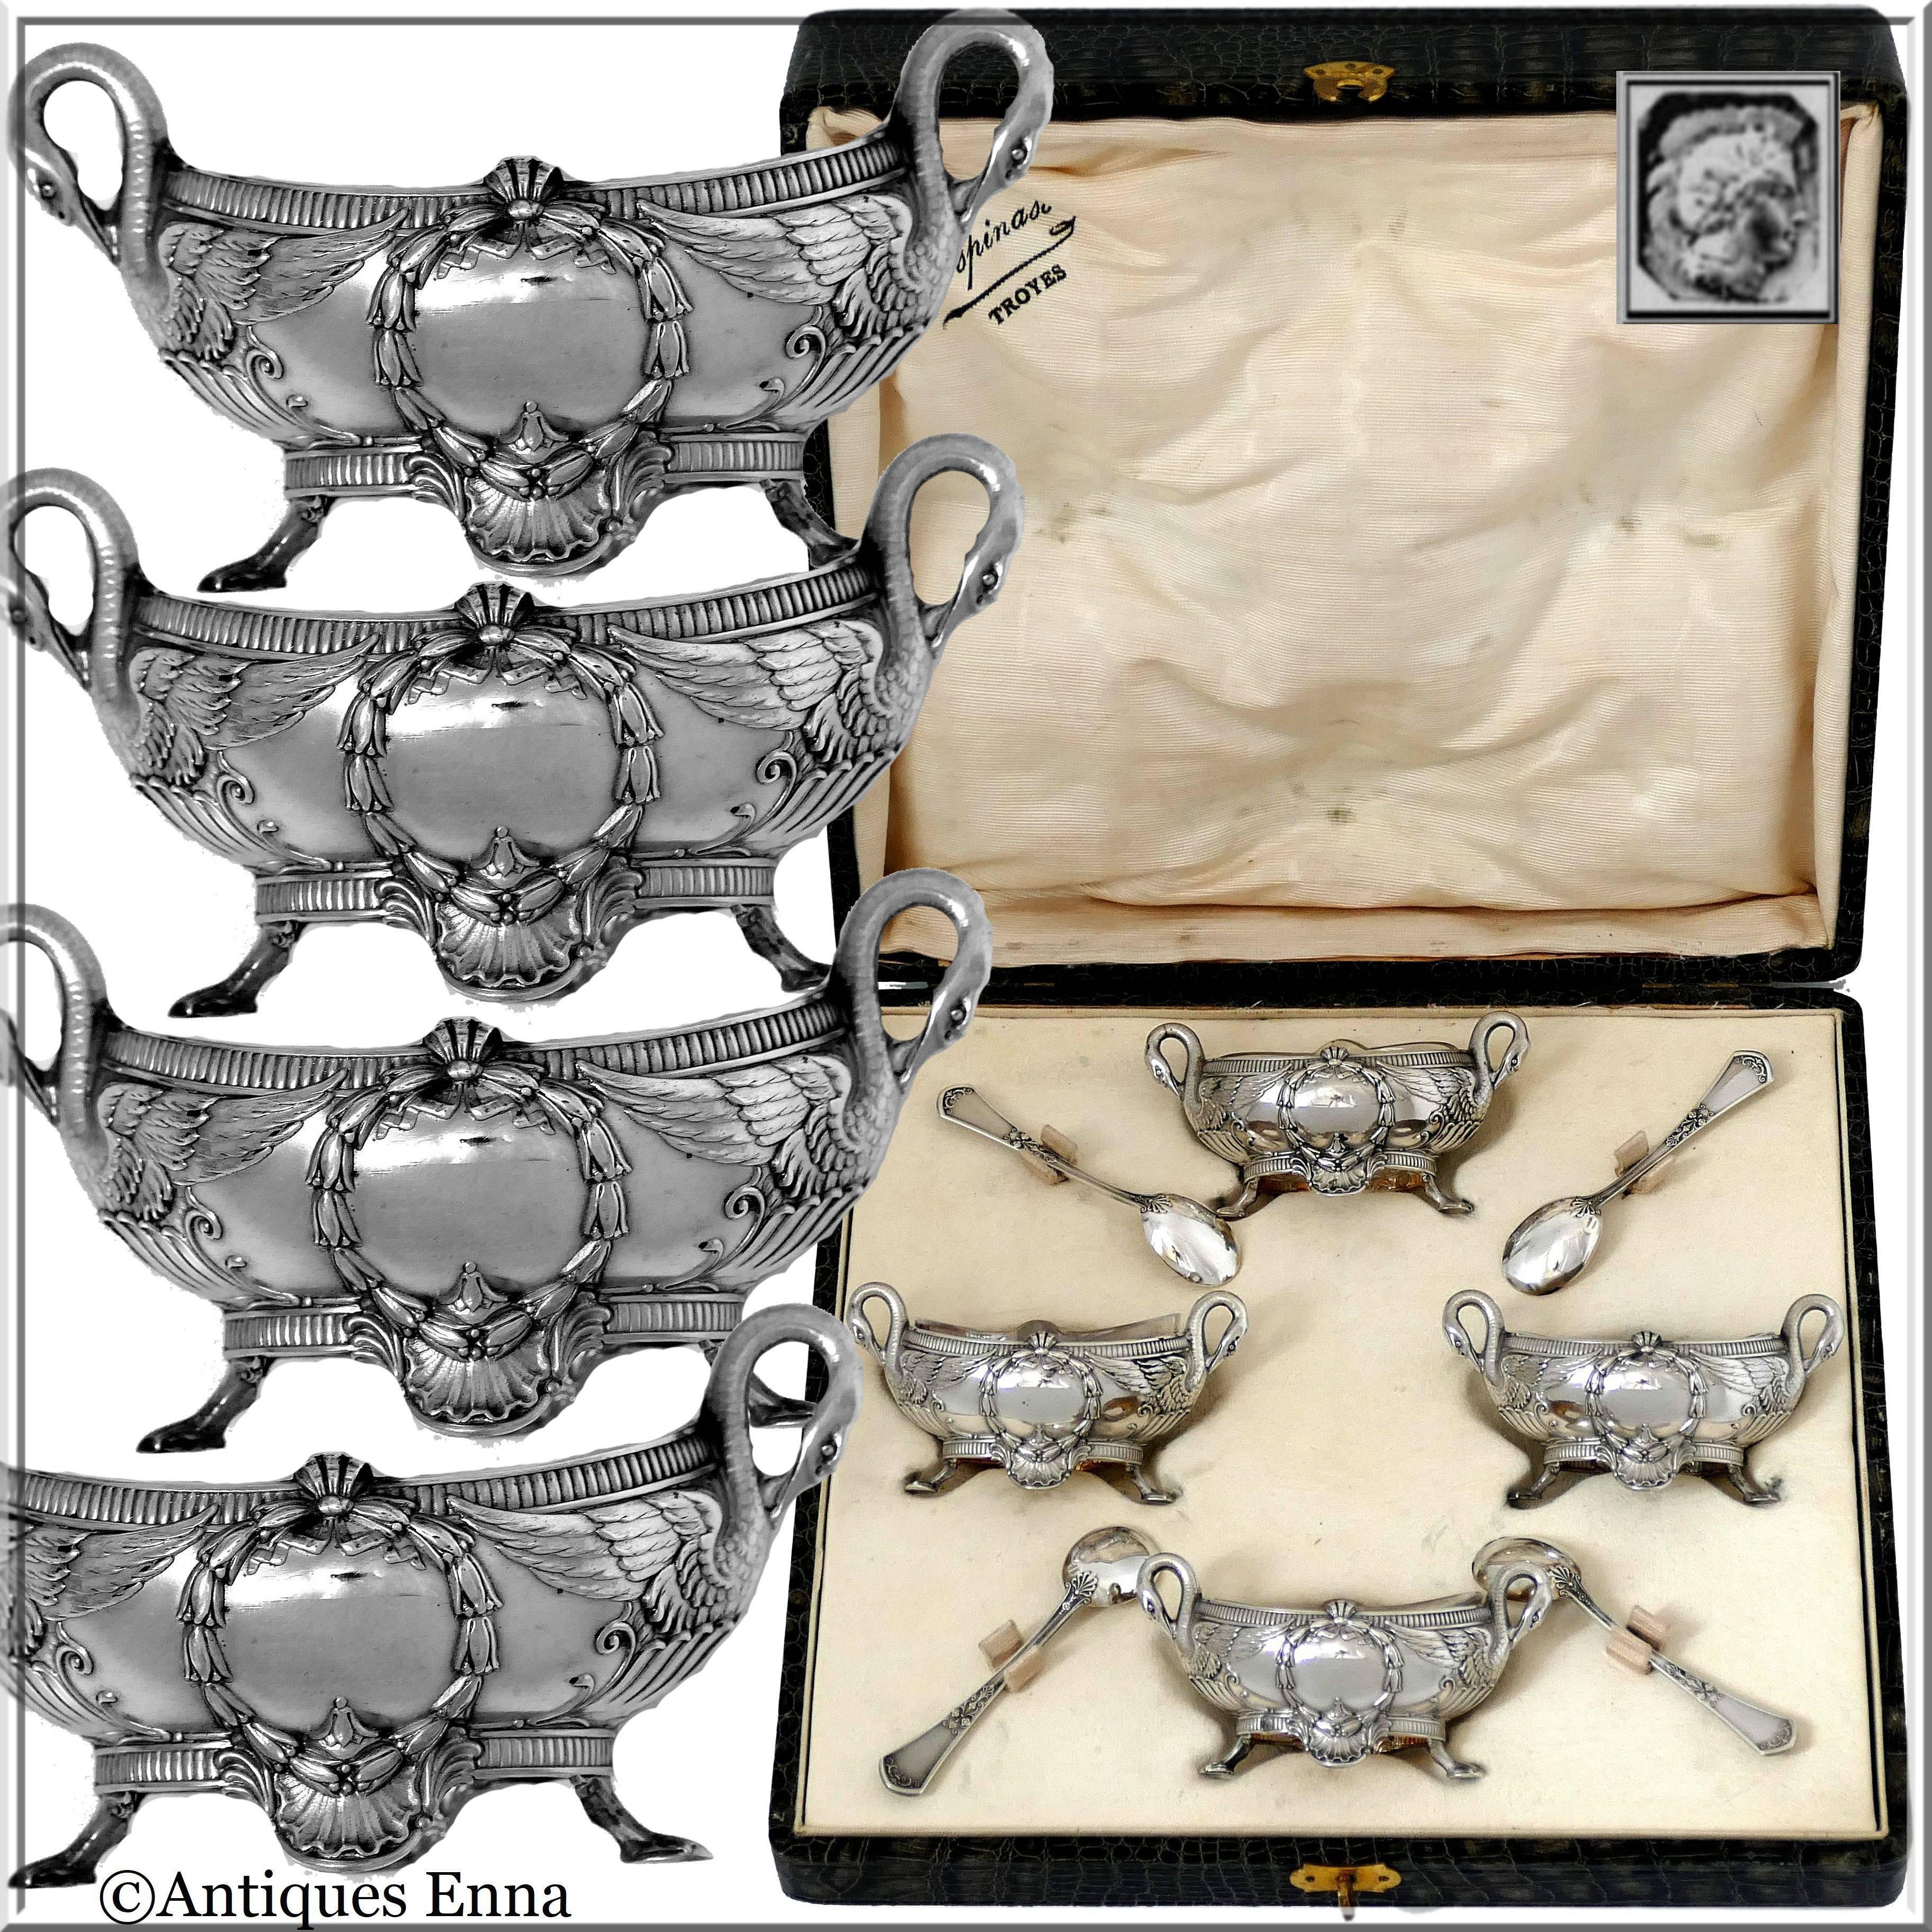 Head of Minerve first titre for 950/1000 French sterling silver guarantee. 

Fabulous French sterling silver salt cellars four-pieces. Each ornately decorated in Empire styling with laurel wreath, shell and swan-shaped handles. No monograms. This